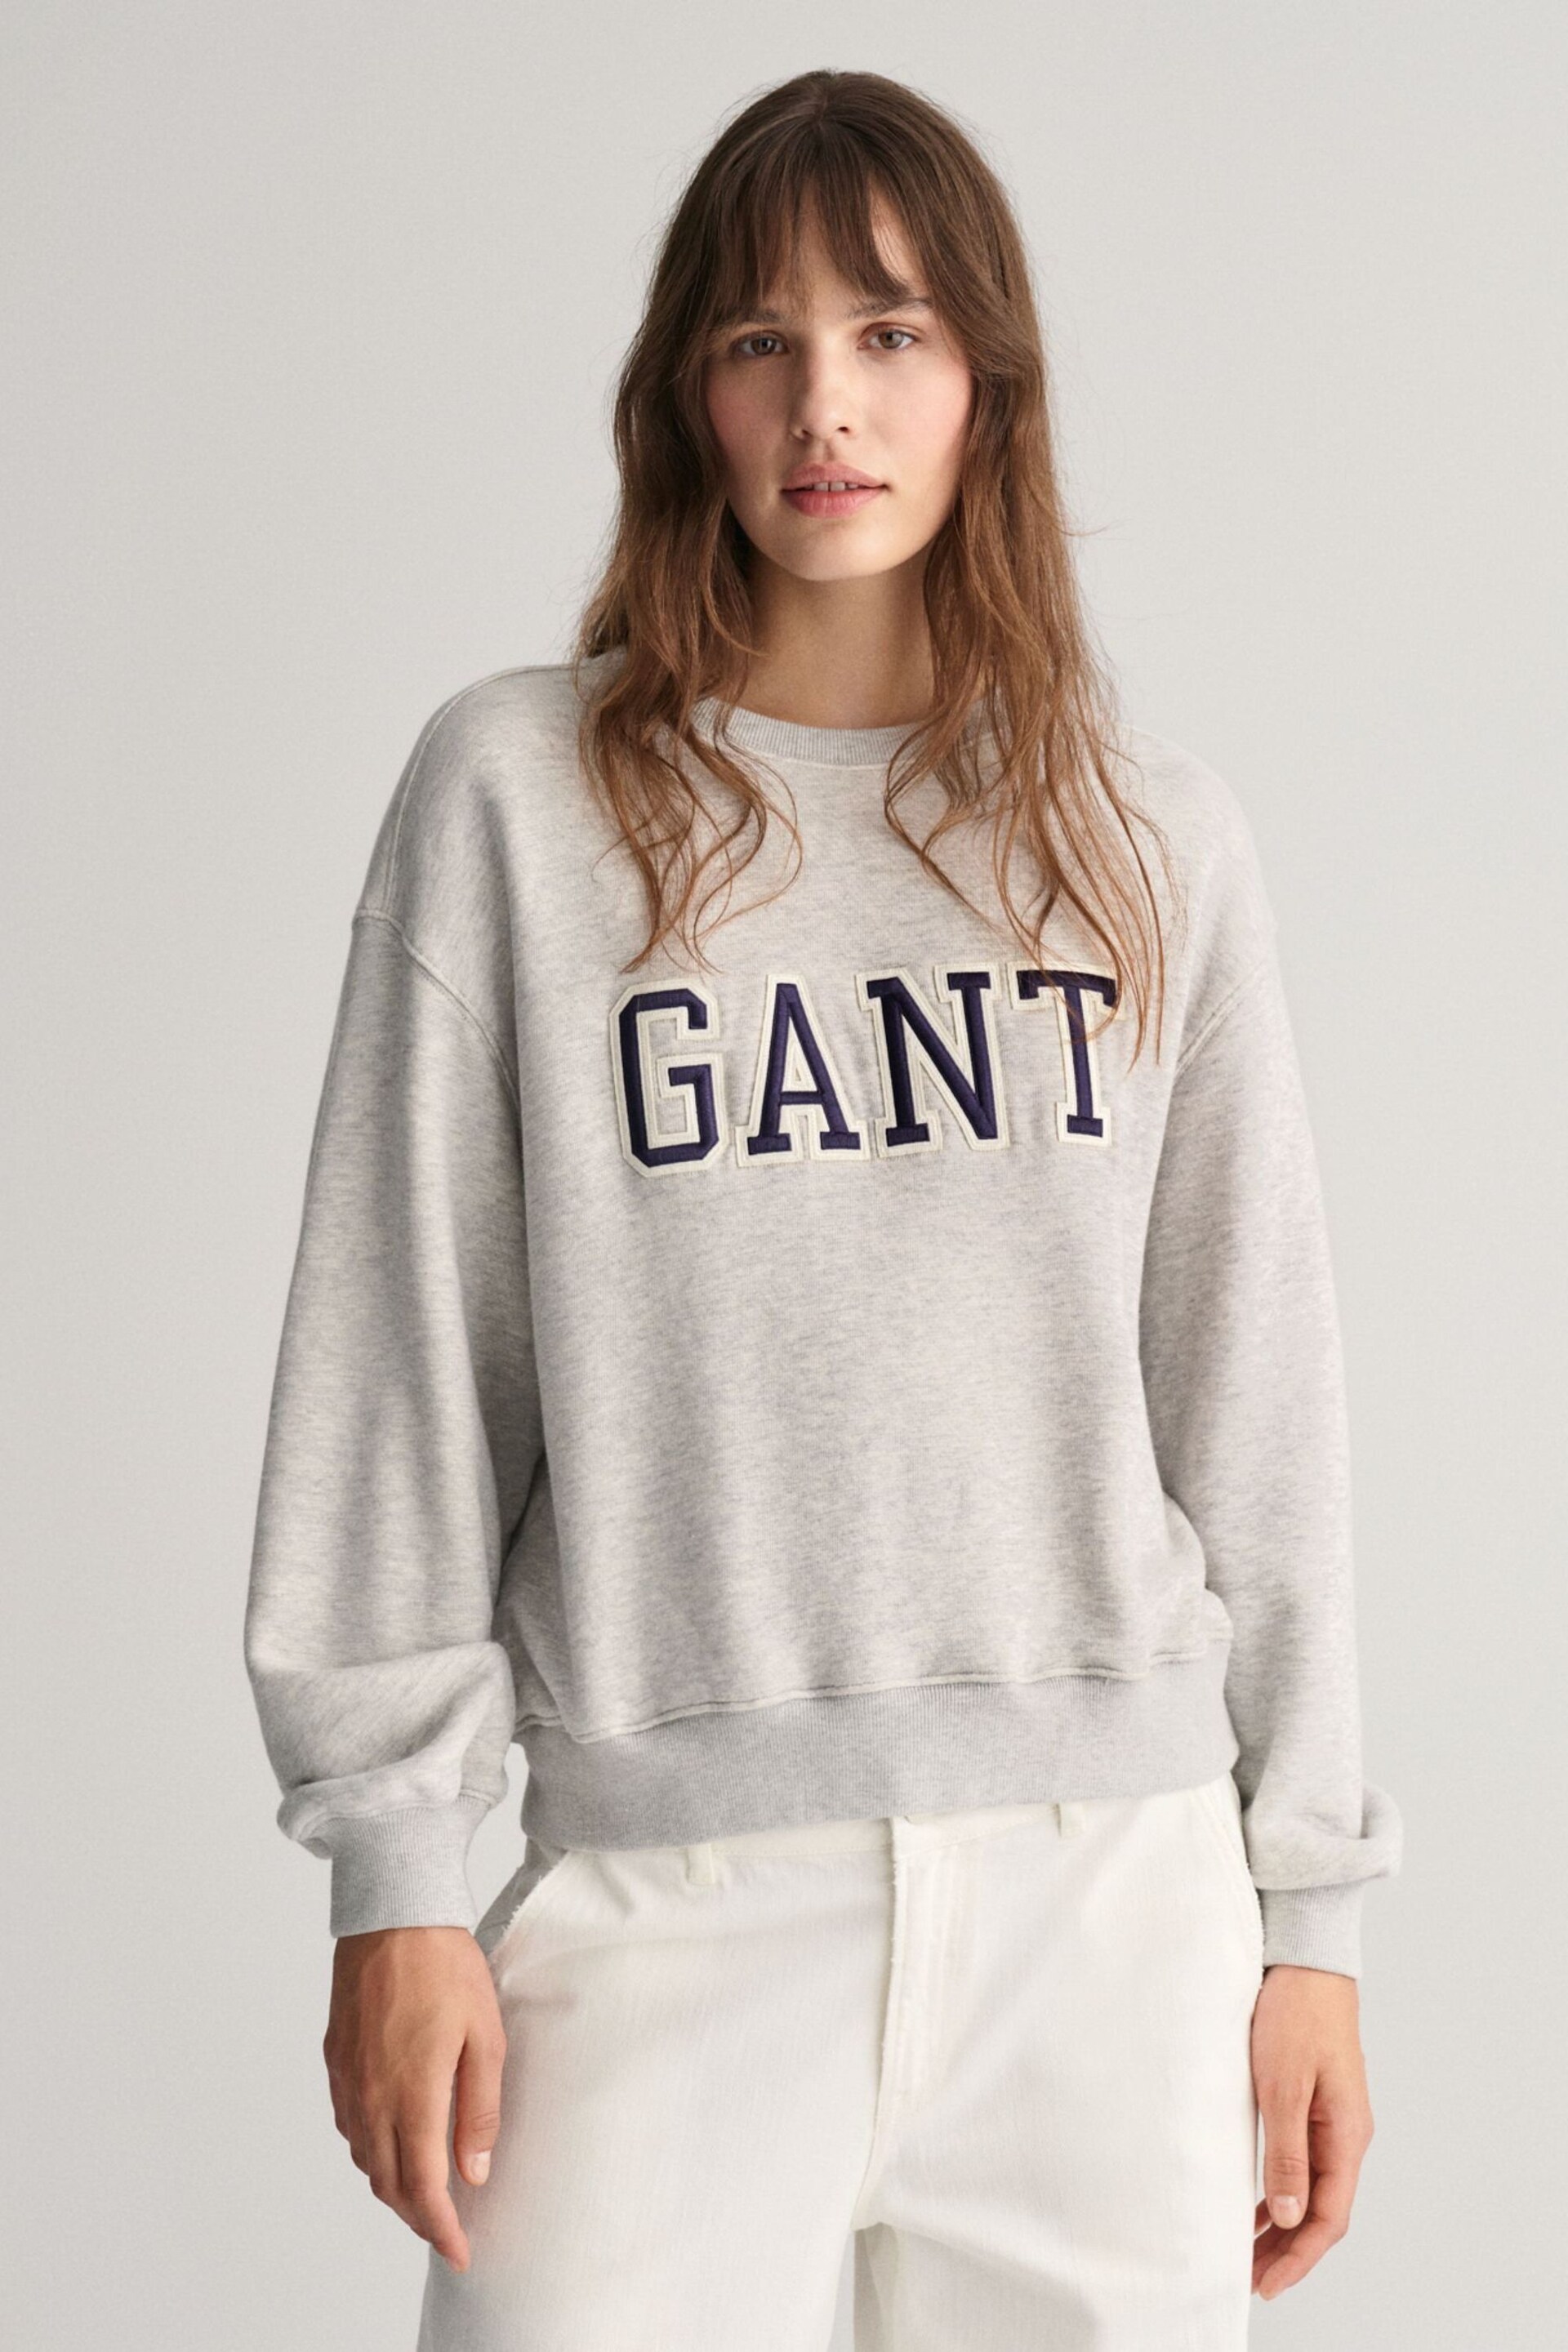 GANT Grey Relaxed Fit Embroidered Logo Sweatshirt - Image 1 of 4